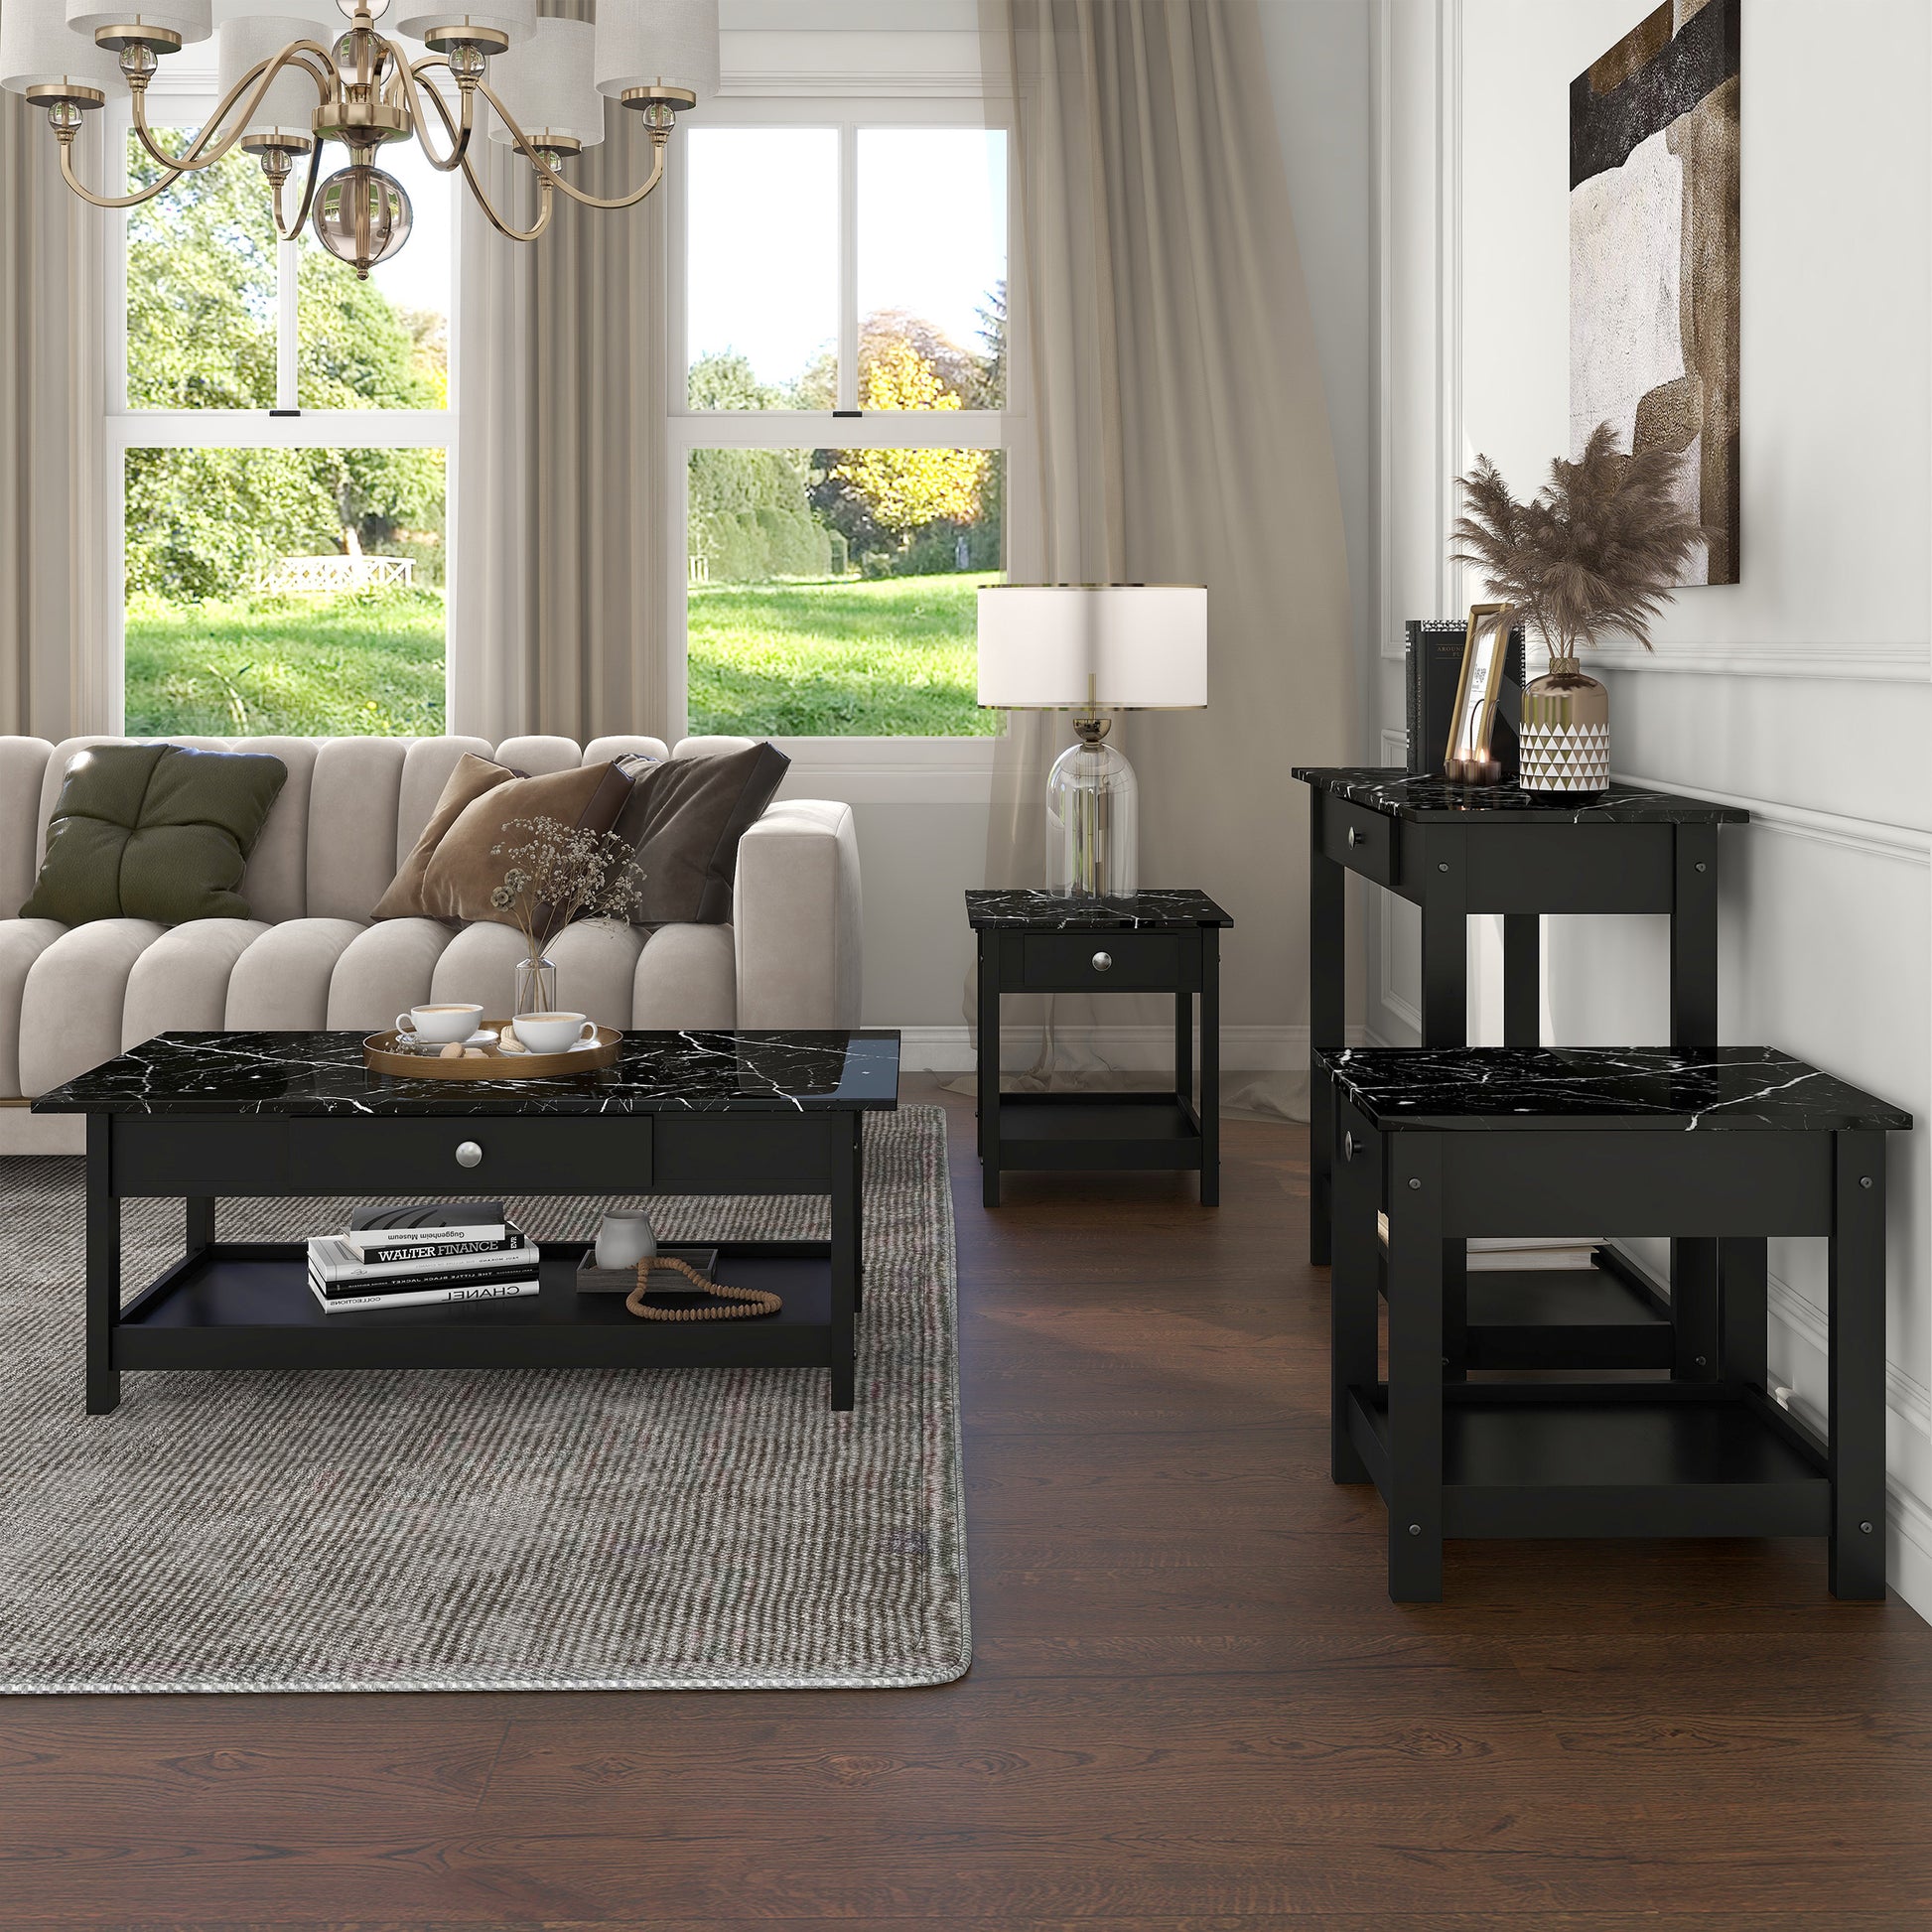 Front-facing four-piece modern black and faux marble coffee table set with lower shelves in a living area with accessories